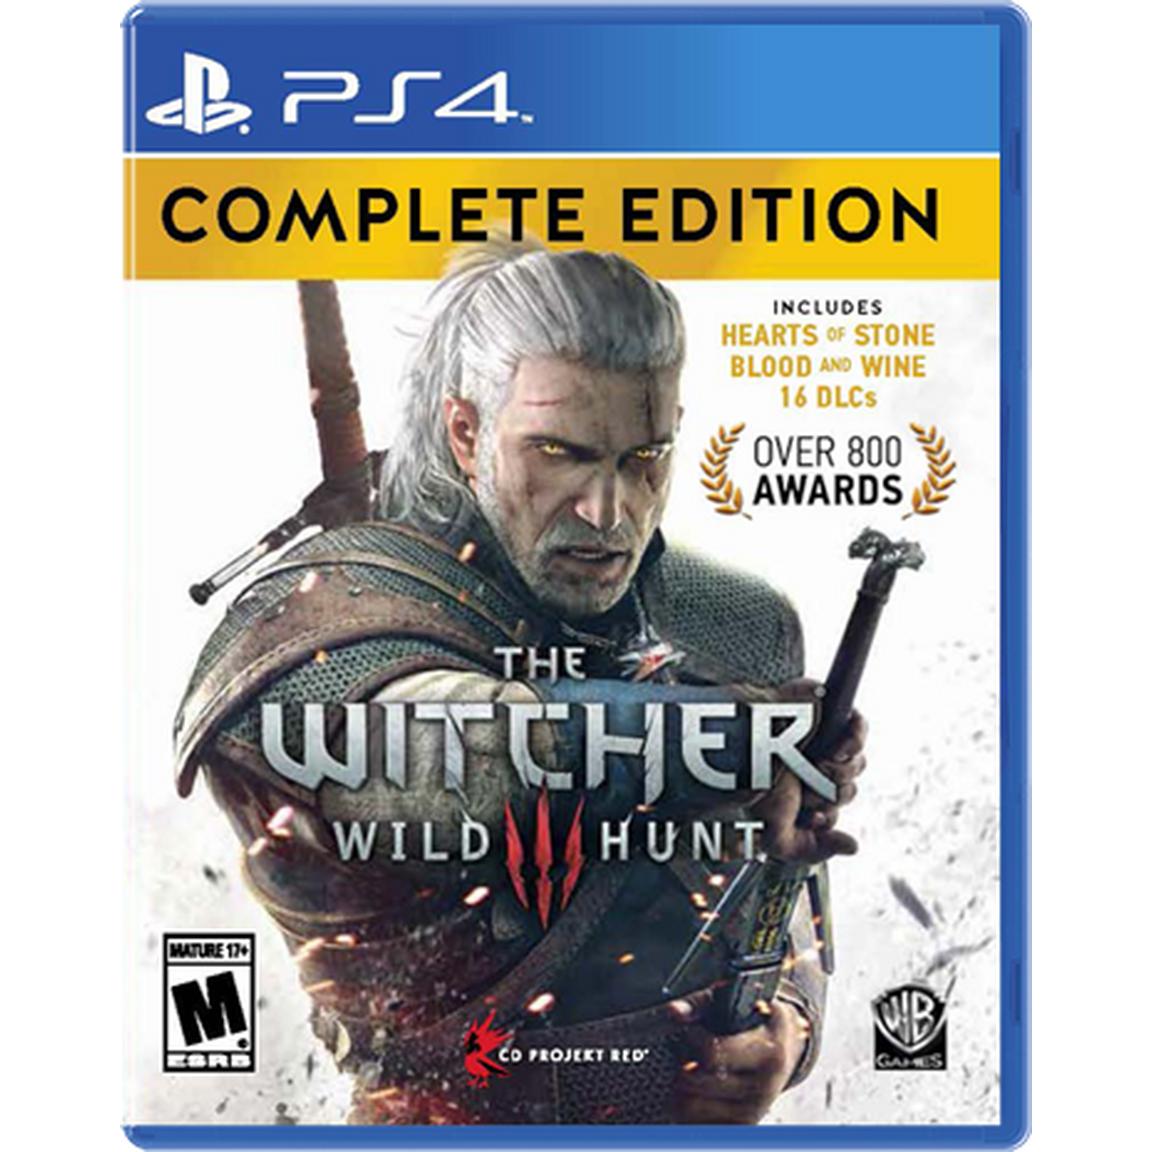 The Witcher III: Wild Hunt Complete Edition - PlayStation 4, Pre-Owned